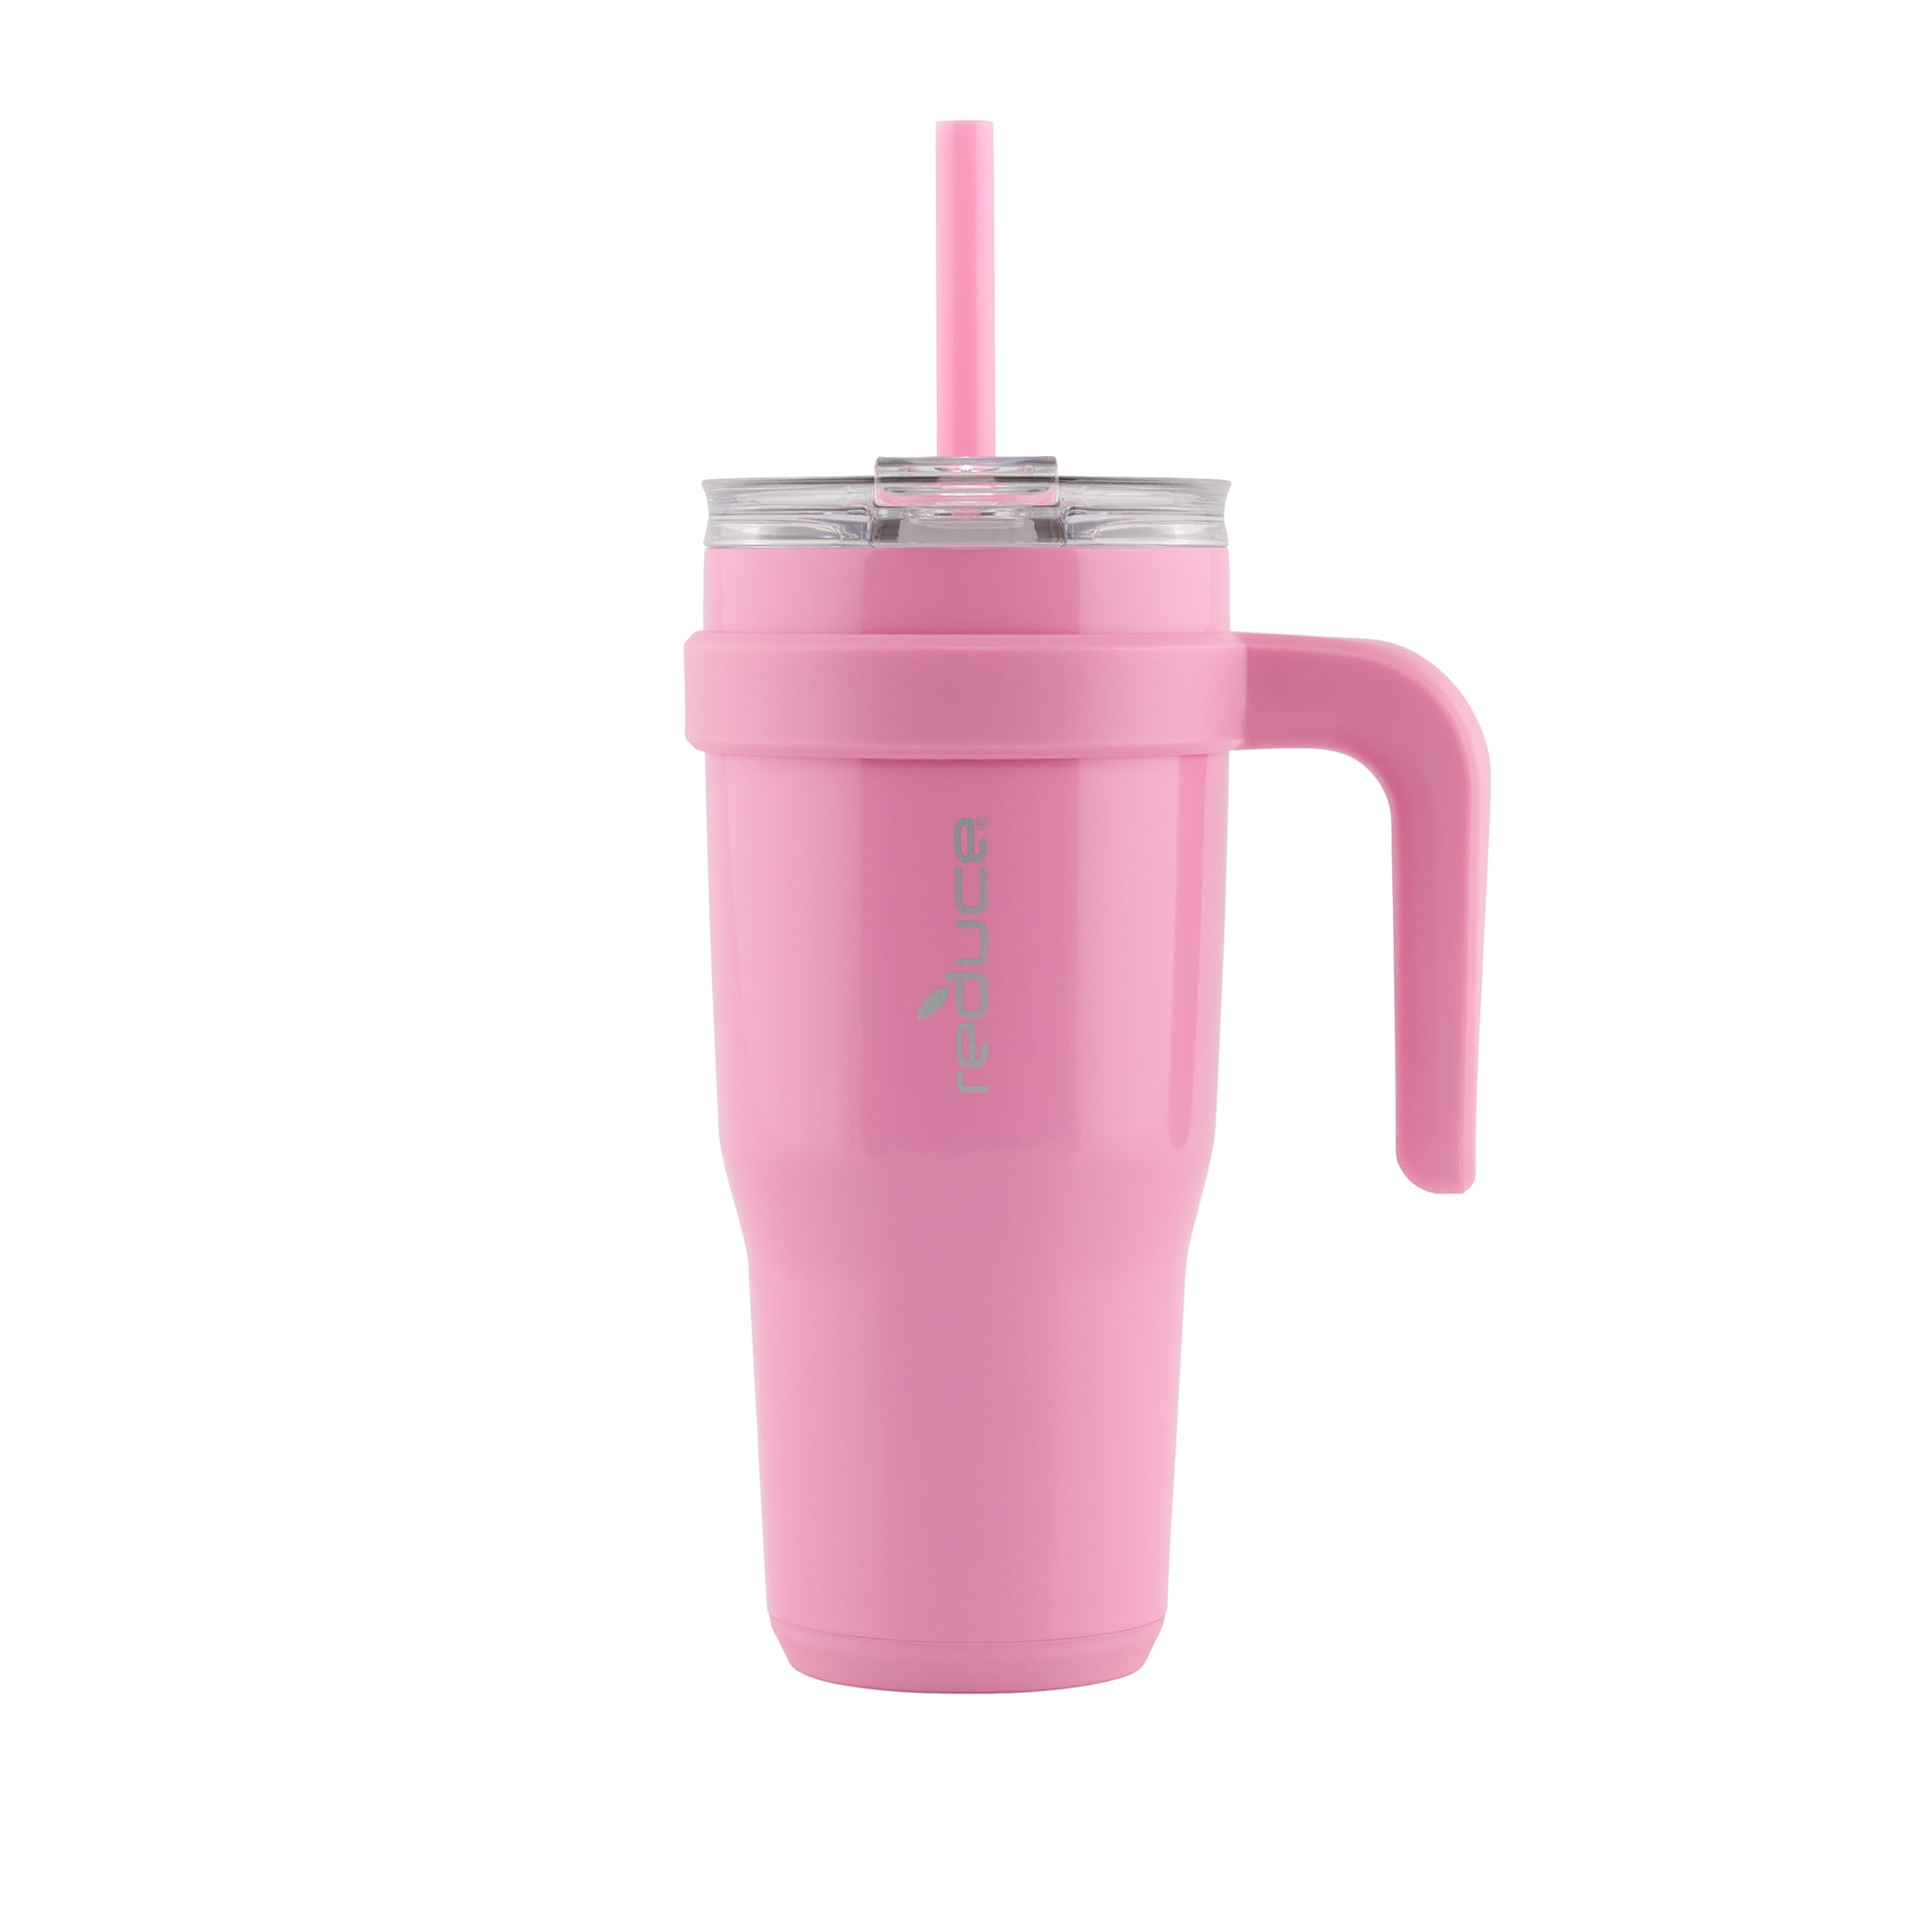 16 oz Portable Glass Tumbler Coffee Cup with Lid and Straw, Silicone Sleeve  & Angled Wide Straws, Le…See more 16 oz Portable Glass Tumbler Coffee Cup